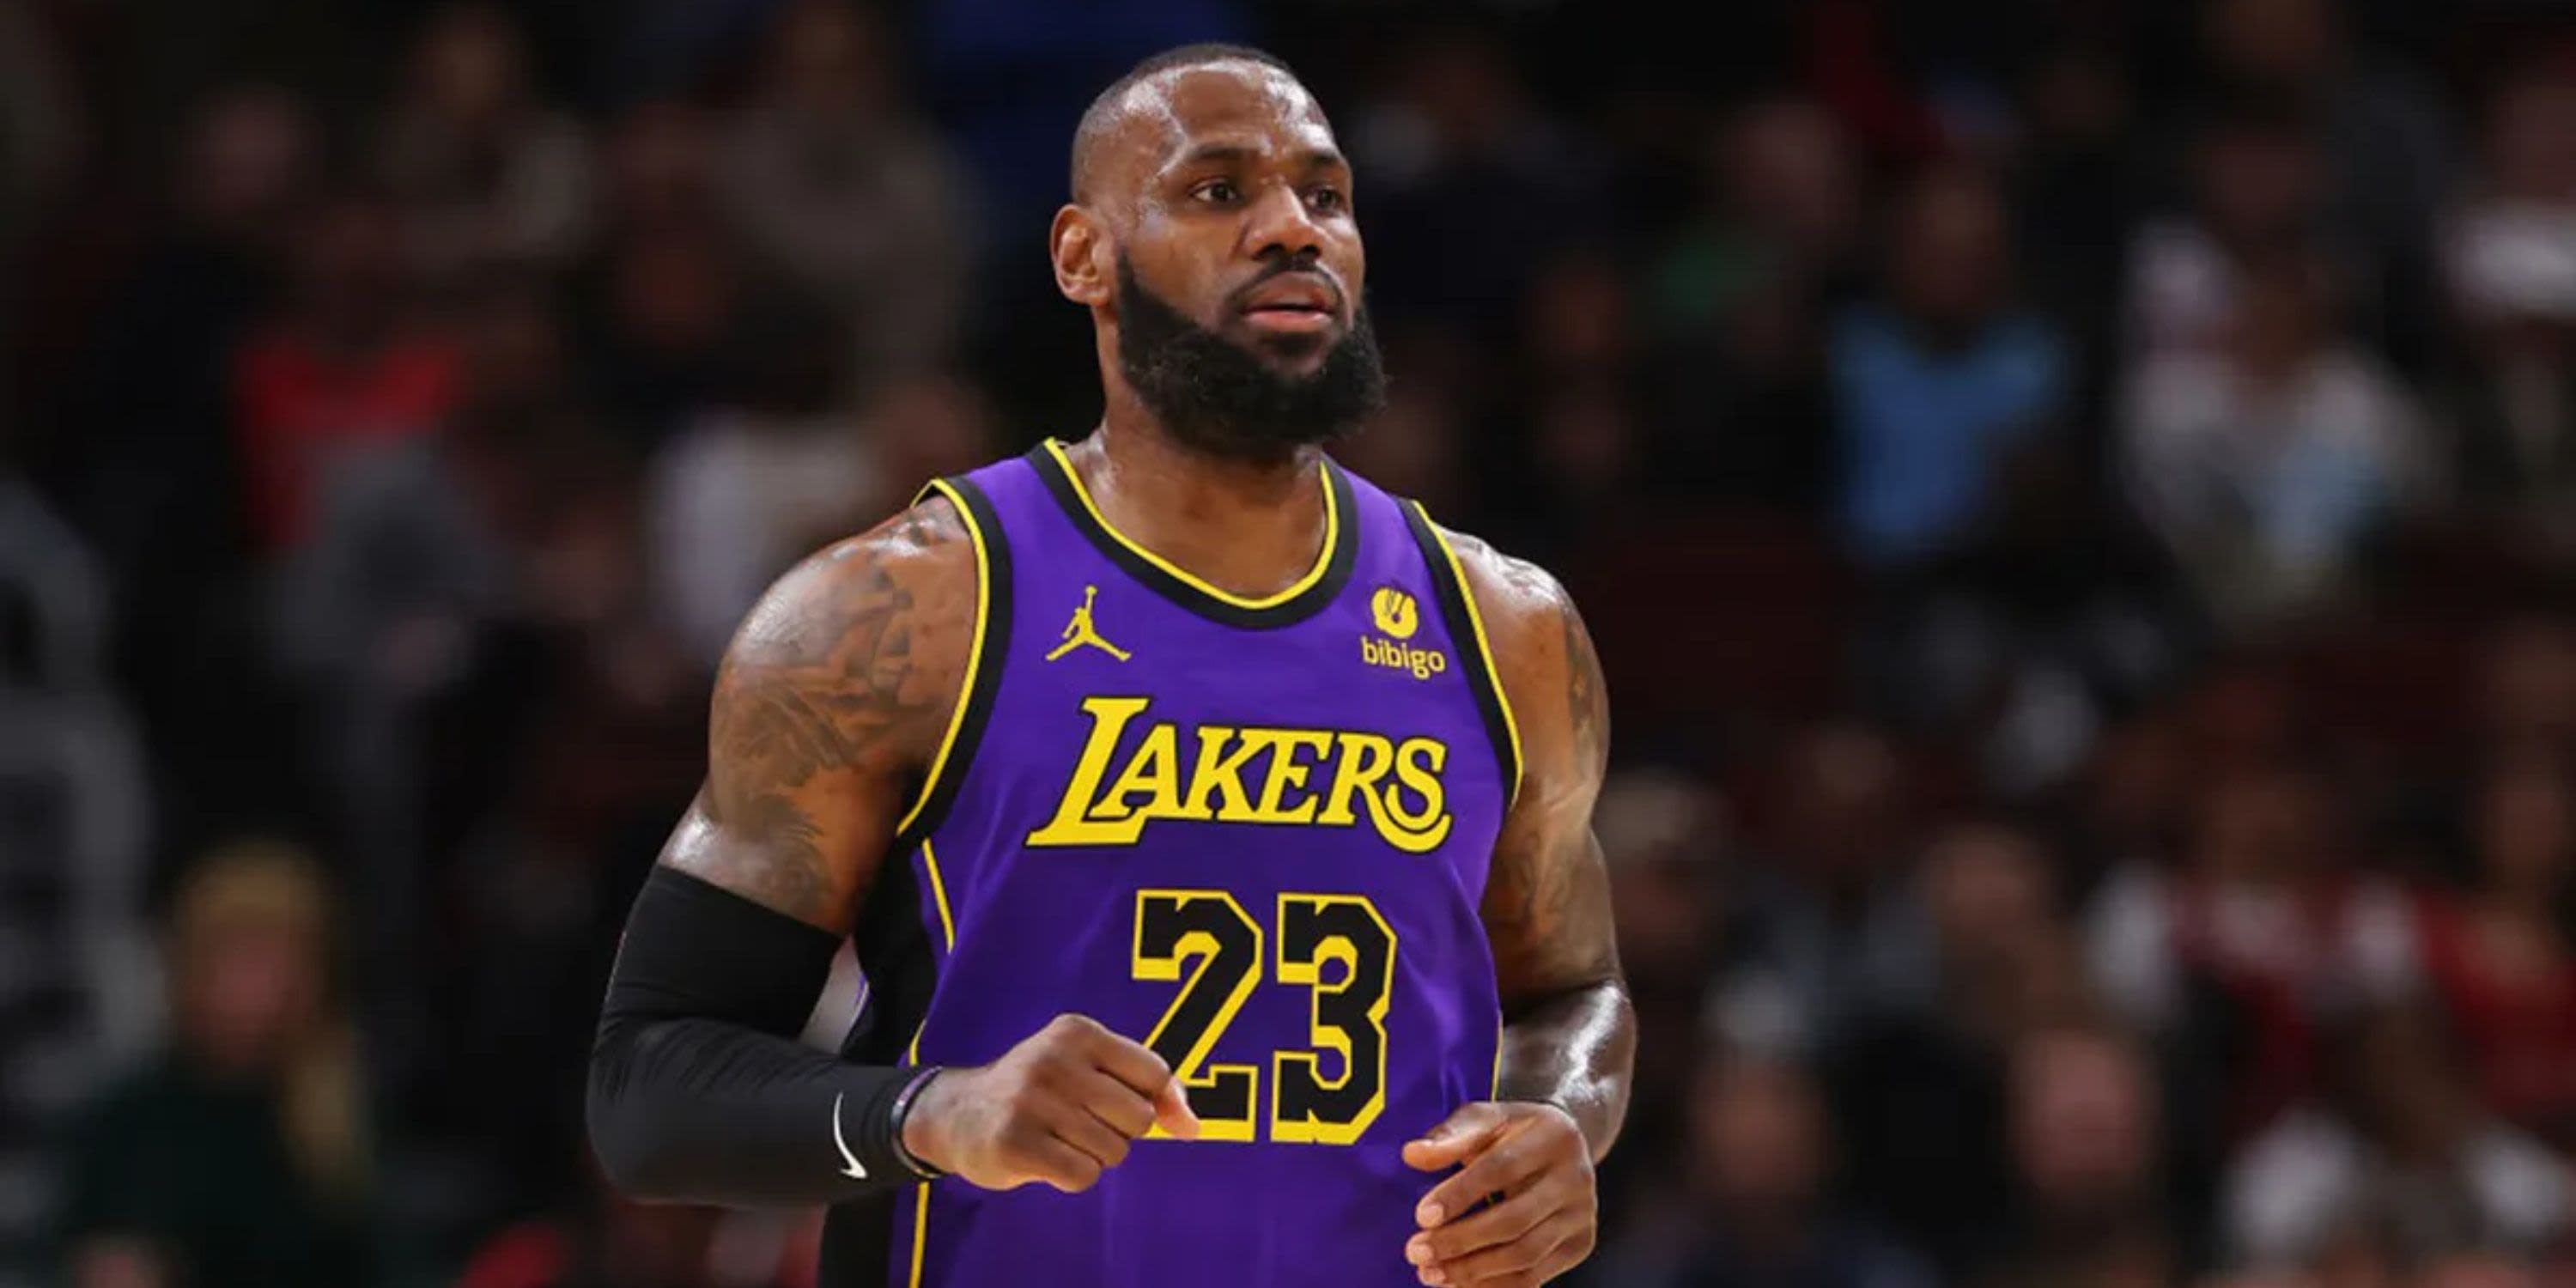 LeBron James' Agent Hints at Lakers' Future in Live TV Slip Up